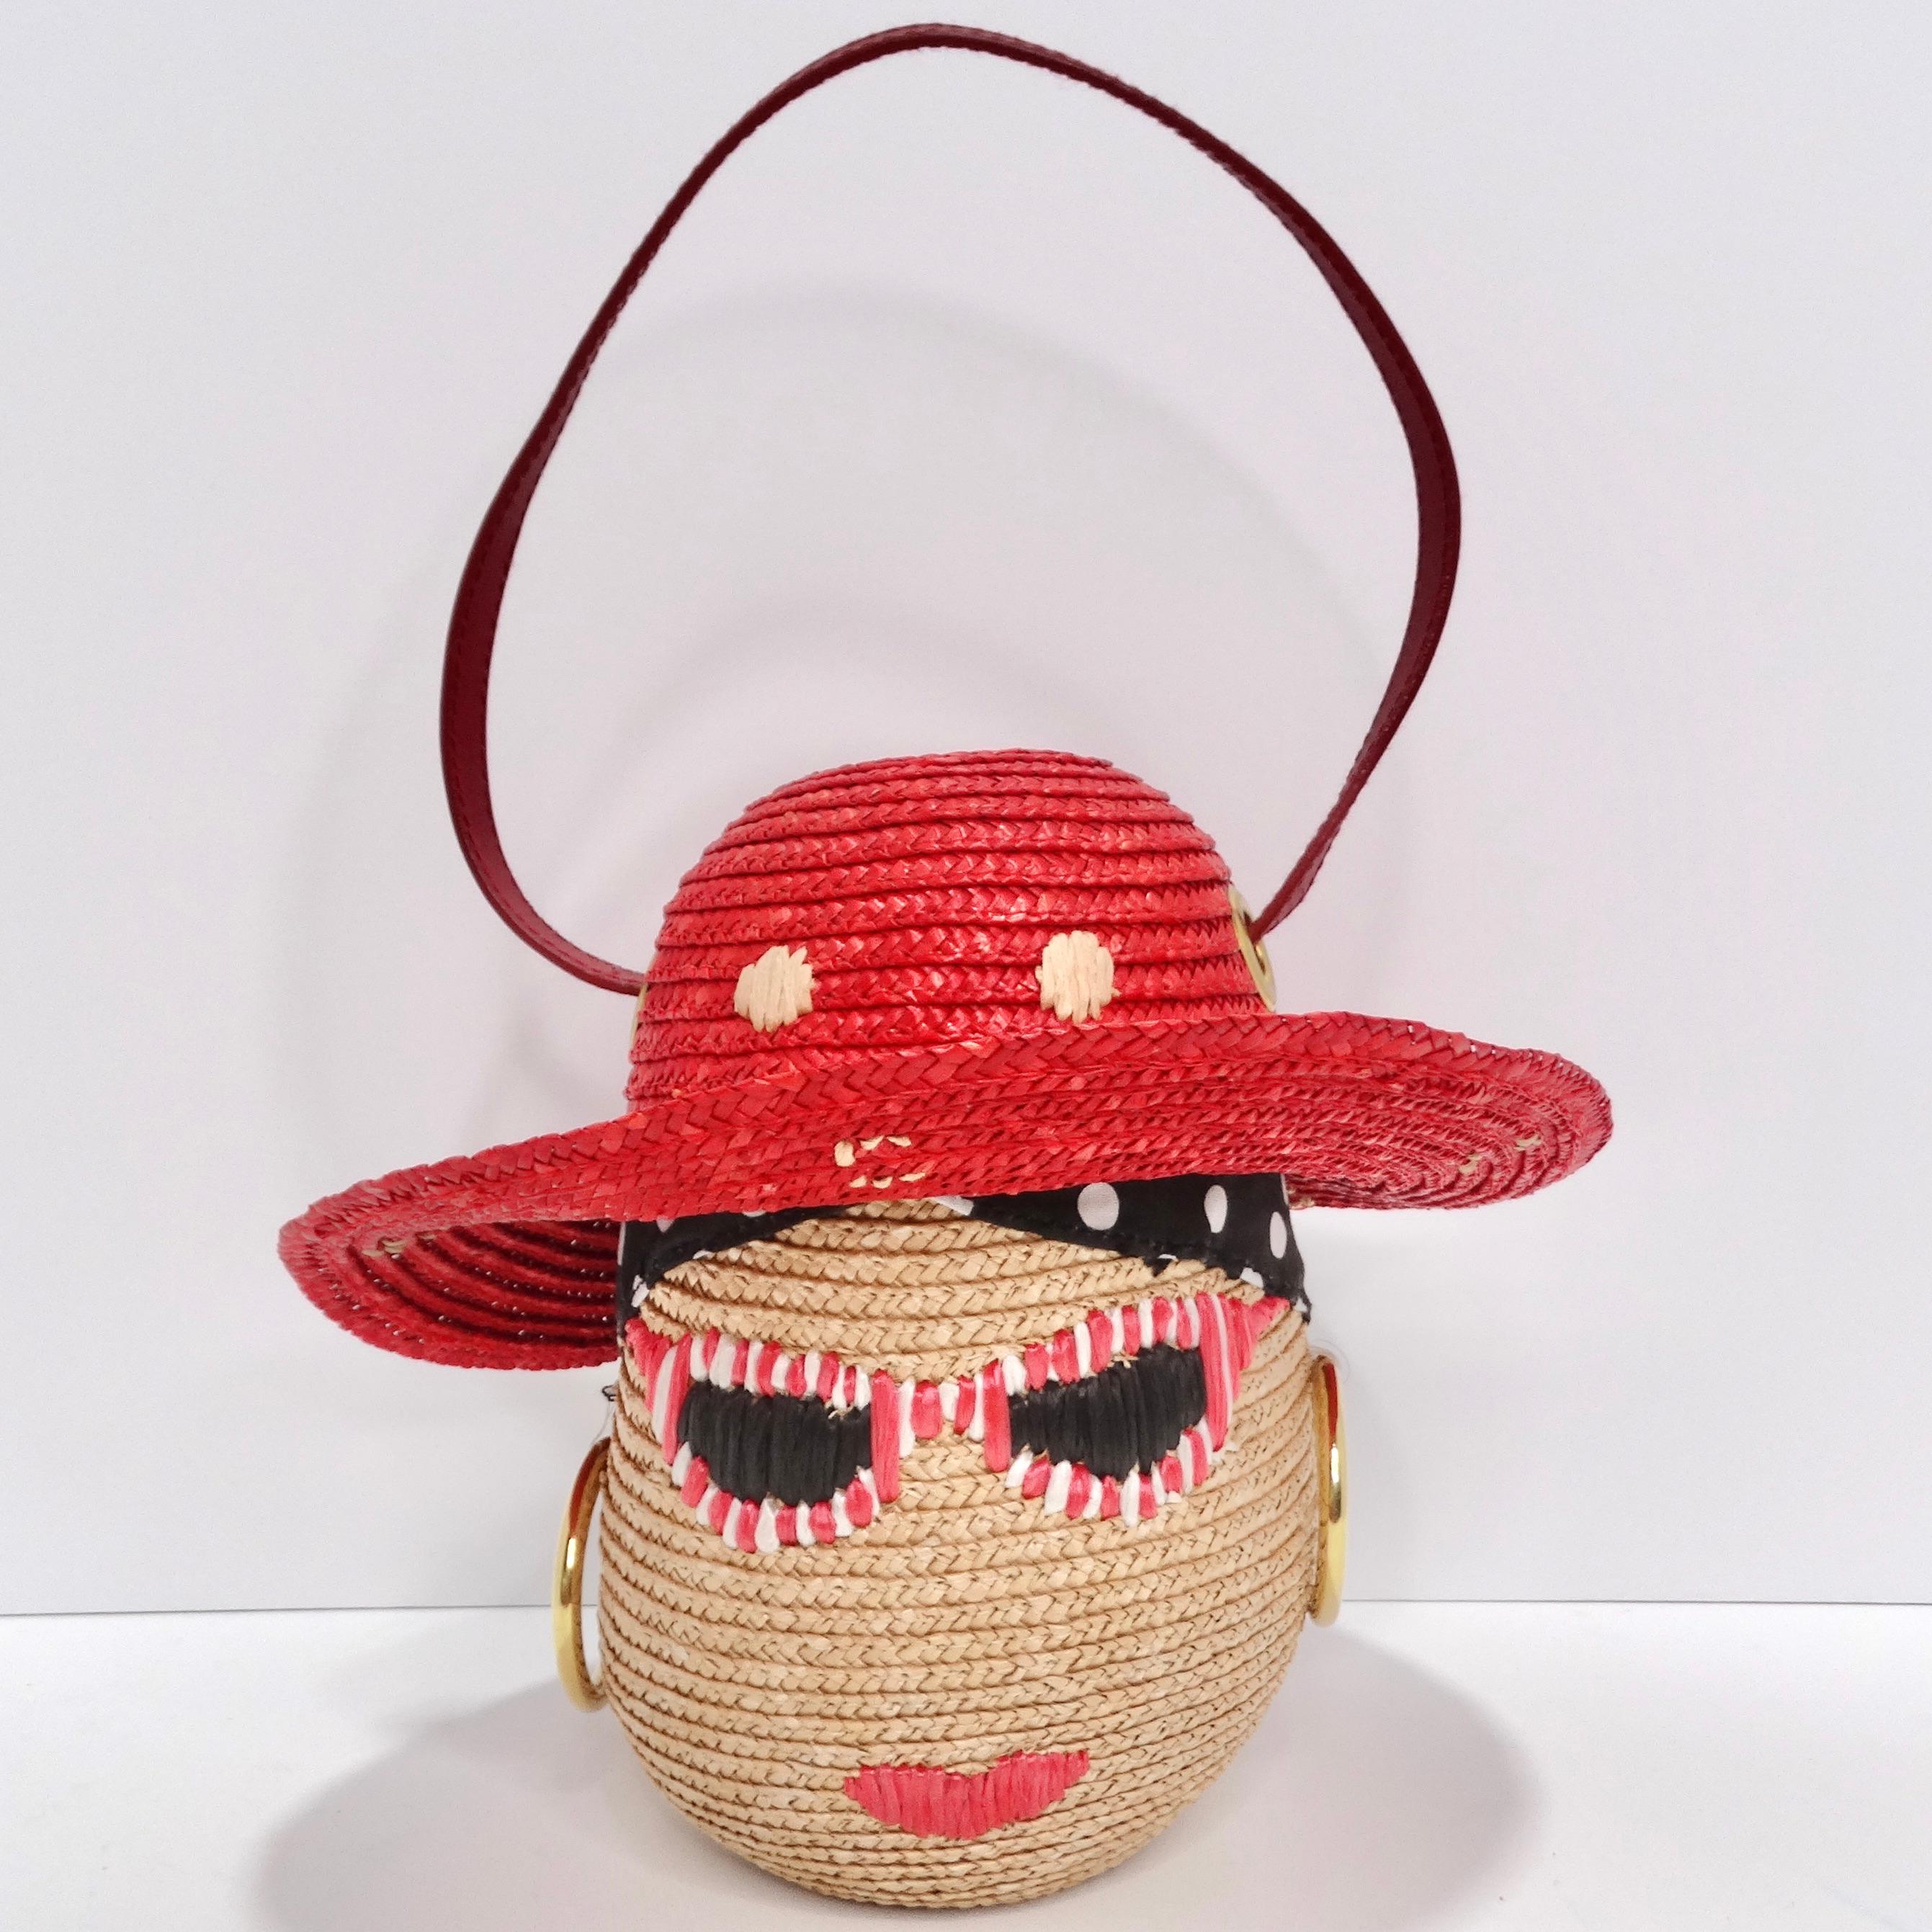 Elevate your style with this Lulu Guinness Face Motif Raffia Woven Basket circa 1990s! This adorable mini top handle handbag is a true fashion gem, featuring an eye-catching face motif that includes red and white sunglasses, gold-tone hoop earrings,